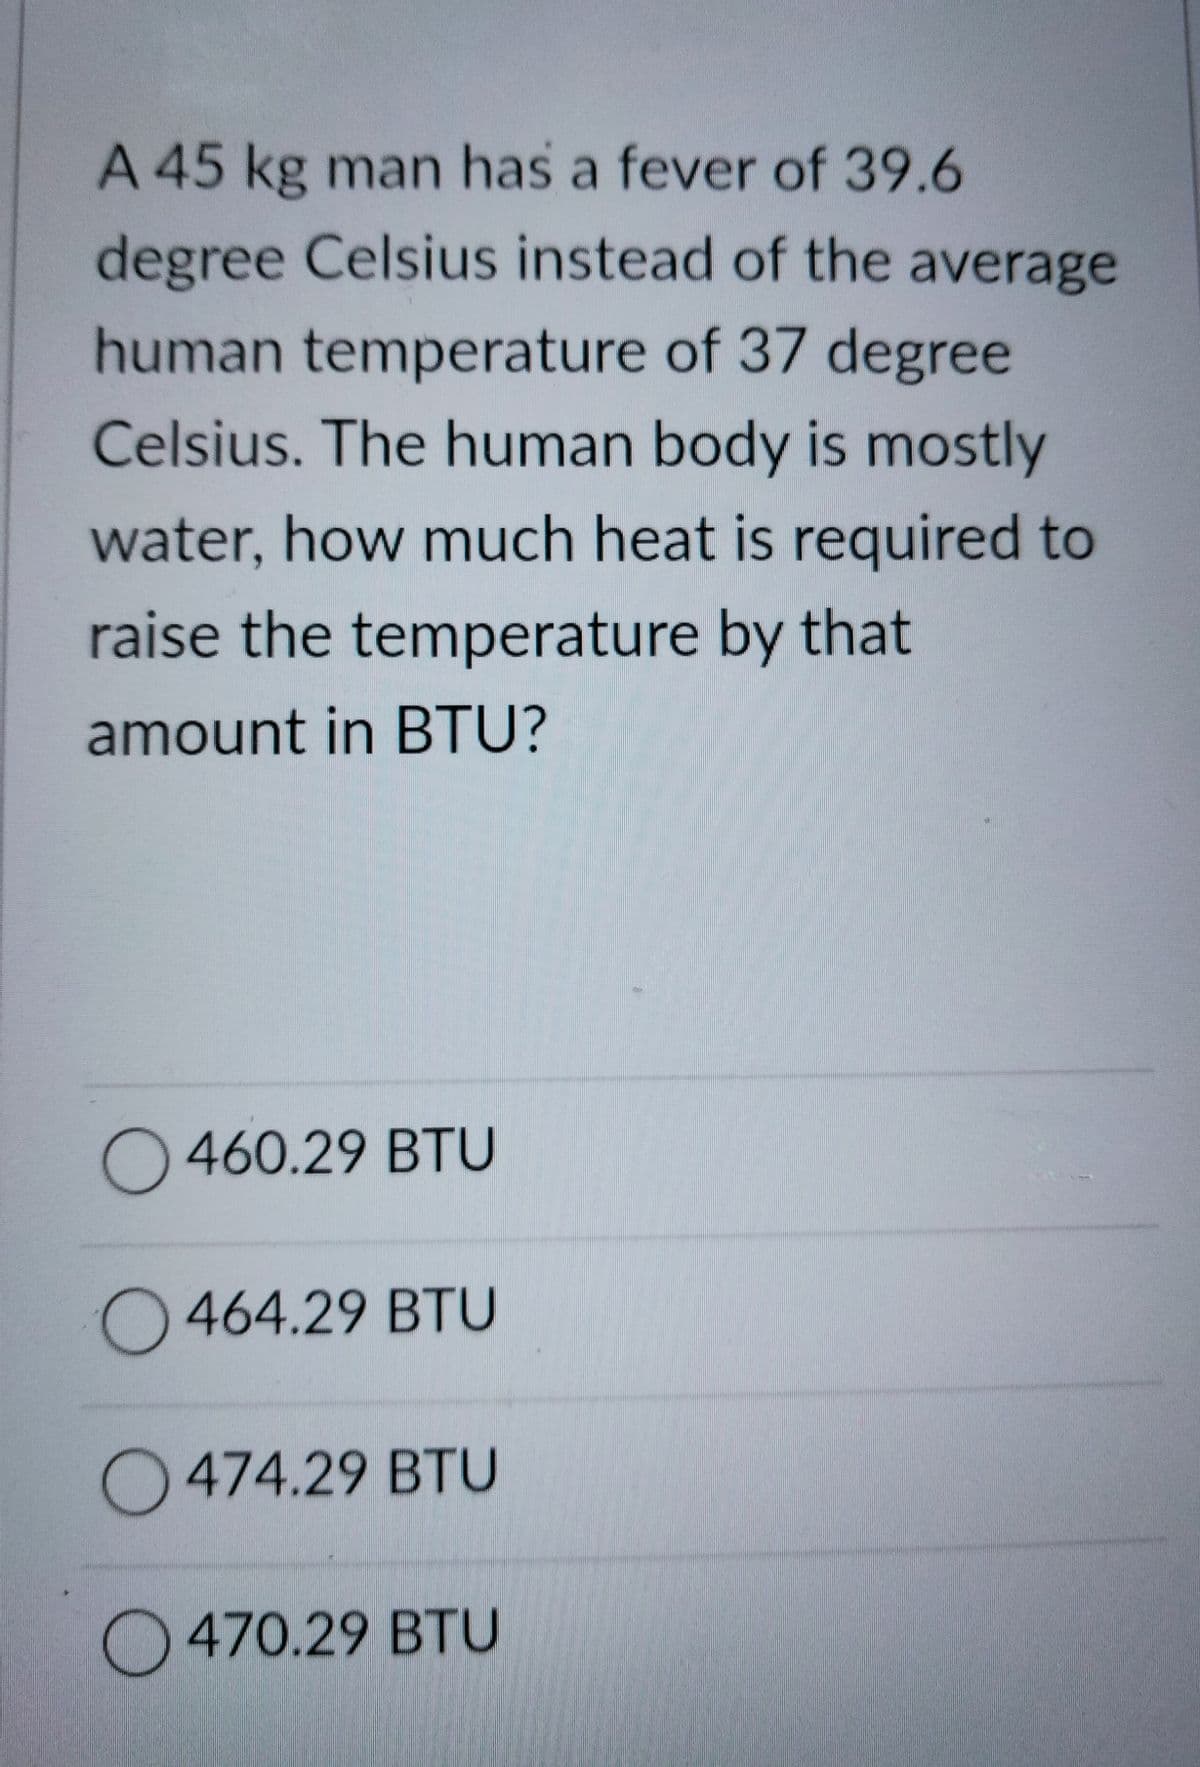 A 45 kg man has a fever of 39.6
degree Celsius instead of the average
human temperature of 37 degree
Celsius. The human body is mostly
water, how much heat is required to
raise the temperature by that
amount in BTU?
O460.29 BTU
O464.29 BTU
O474.29 BTU
O 470.29 BTU
